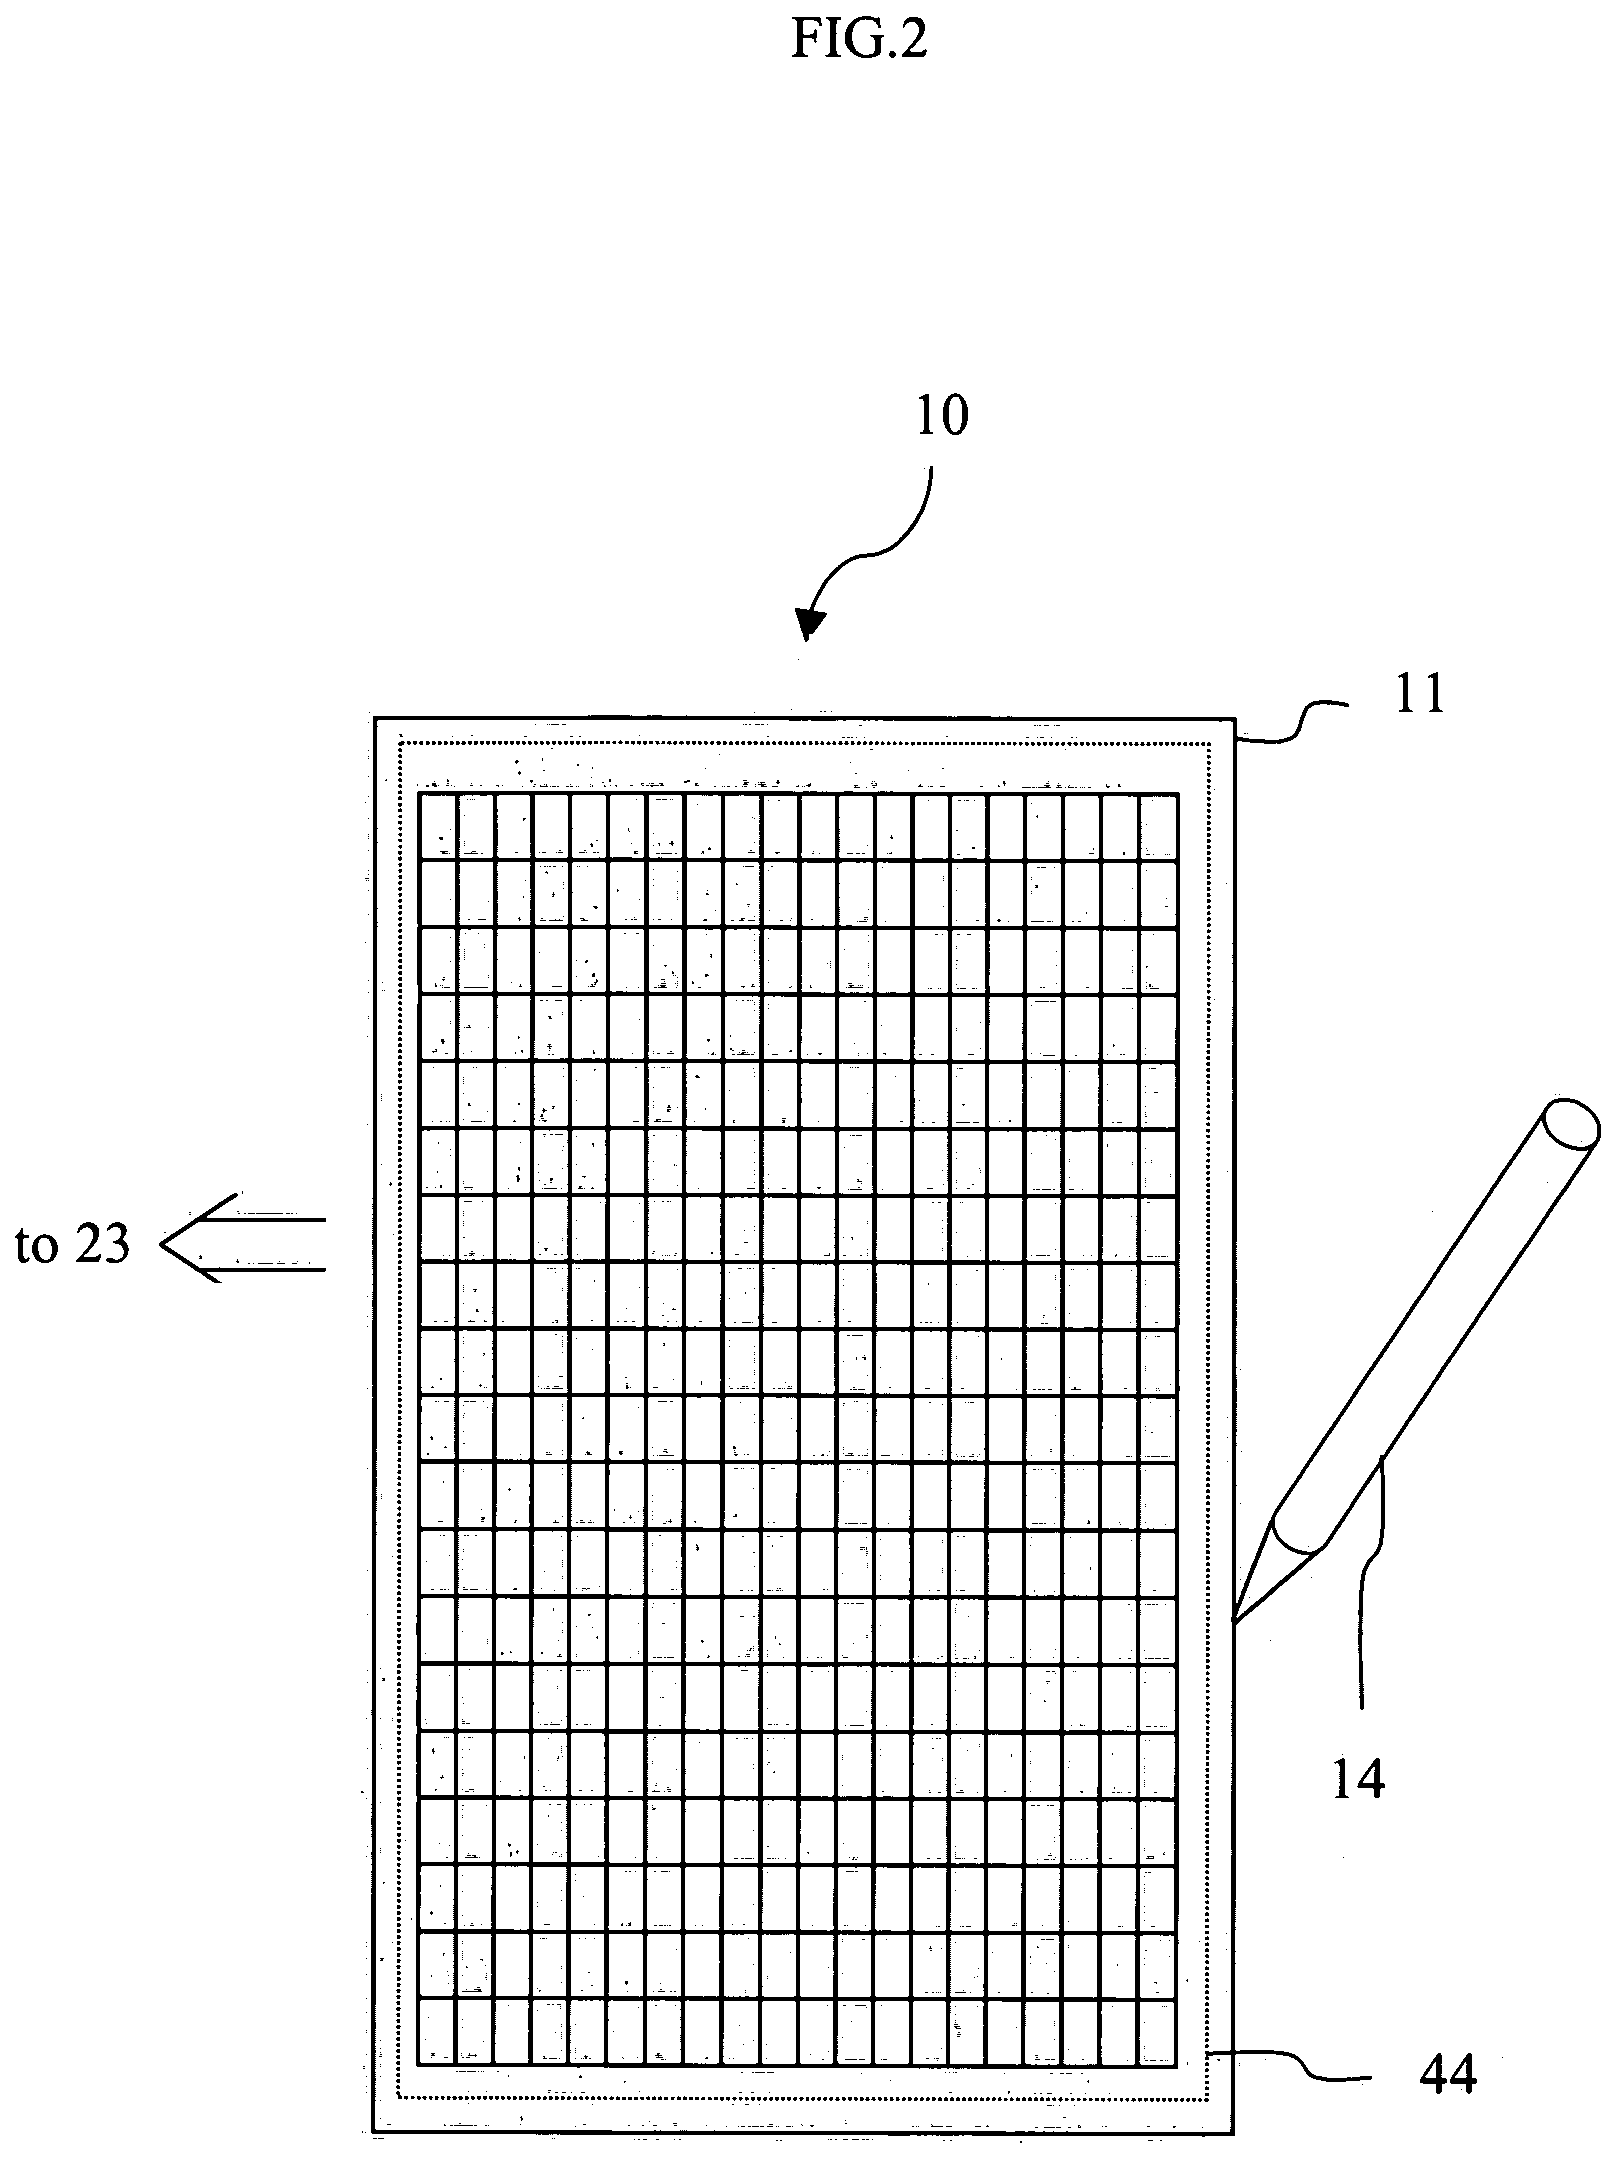 Electronic paper file